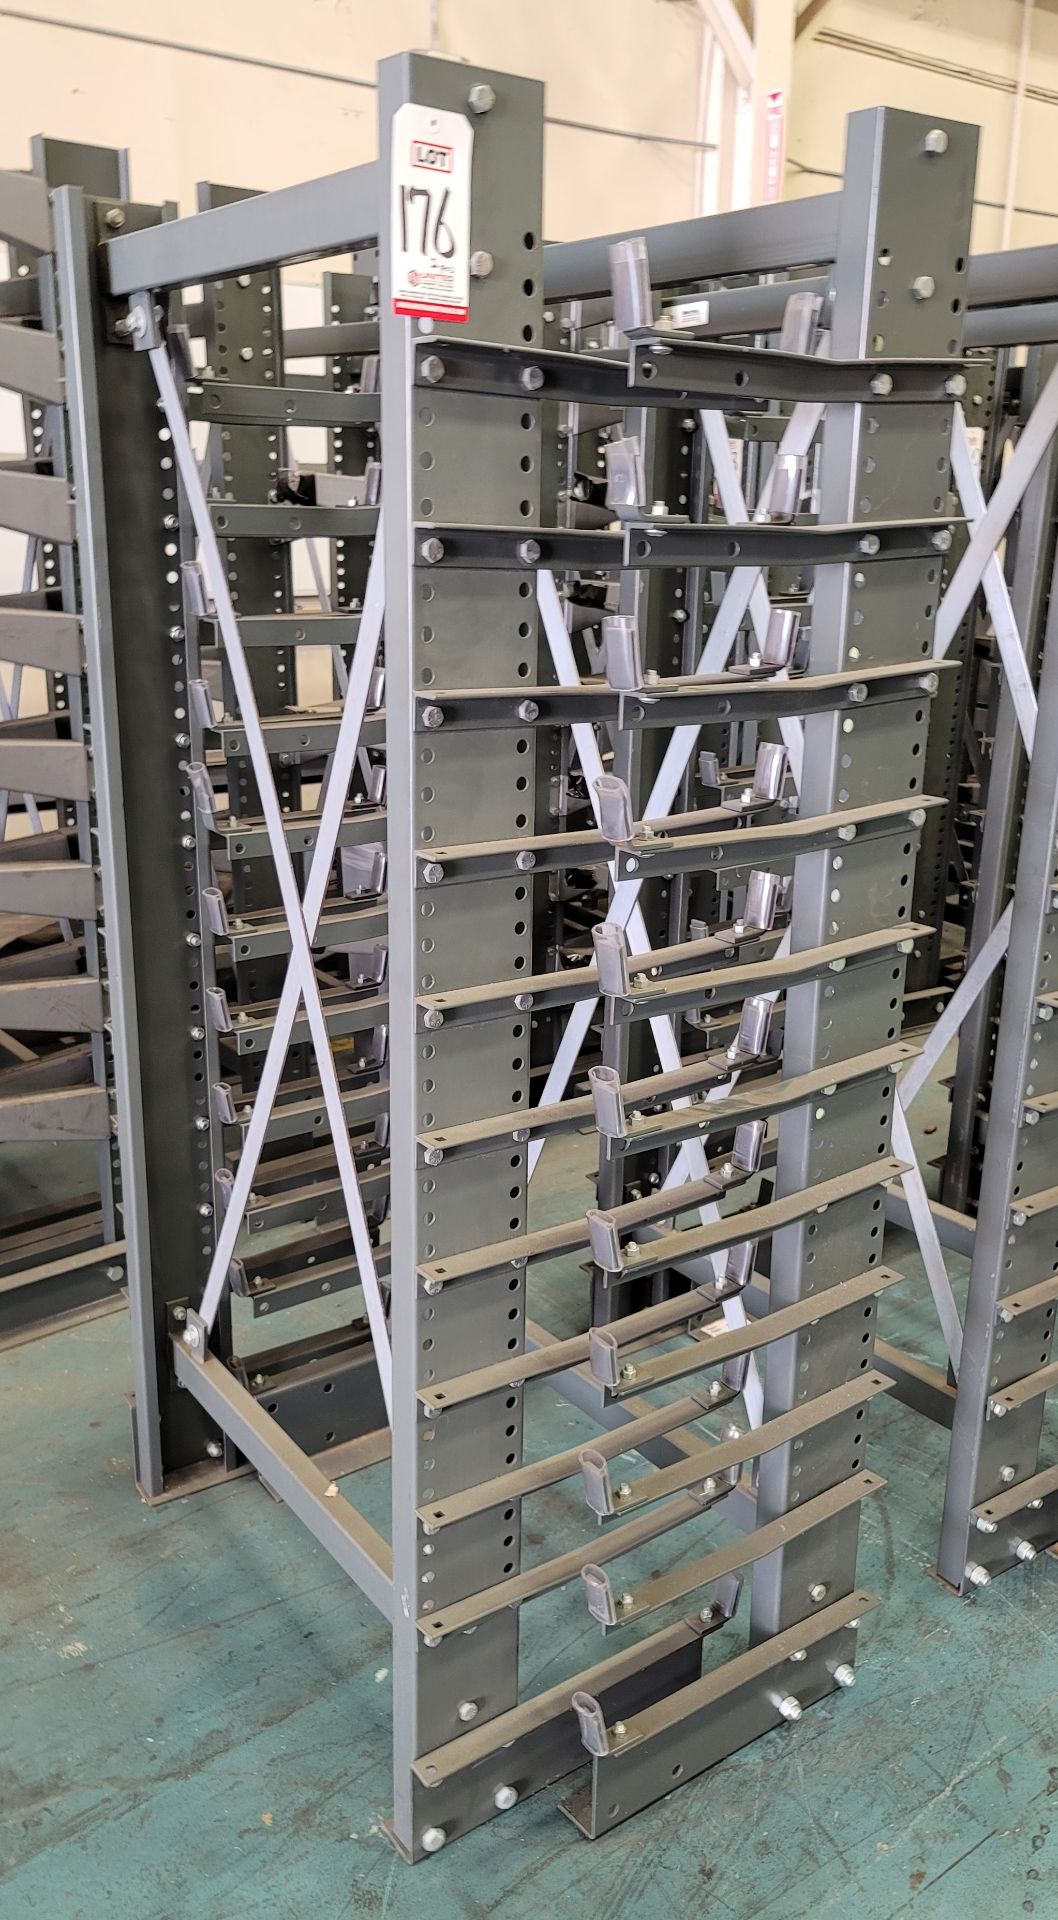 LOT - (2) 3' CANTILEVER MATERIAL RACKS, 12" ARMS, 76" HT, 1,750 LB CAPACITY (LOCATION: BUILDING 15